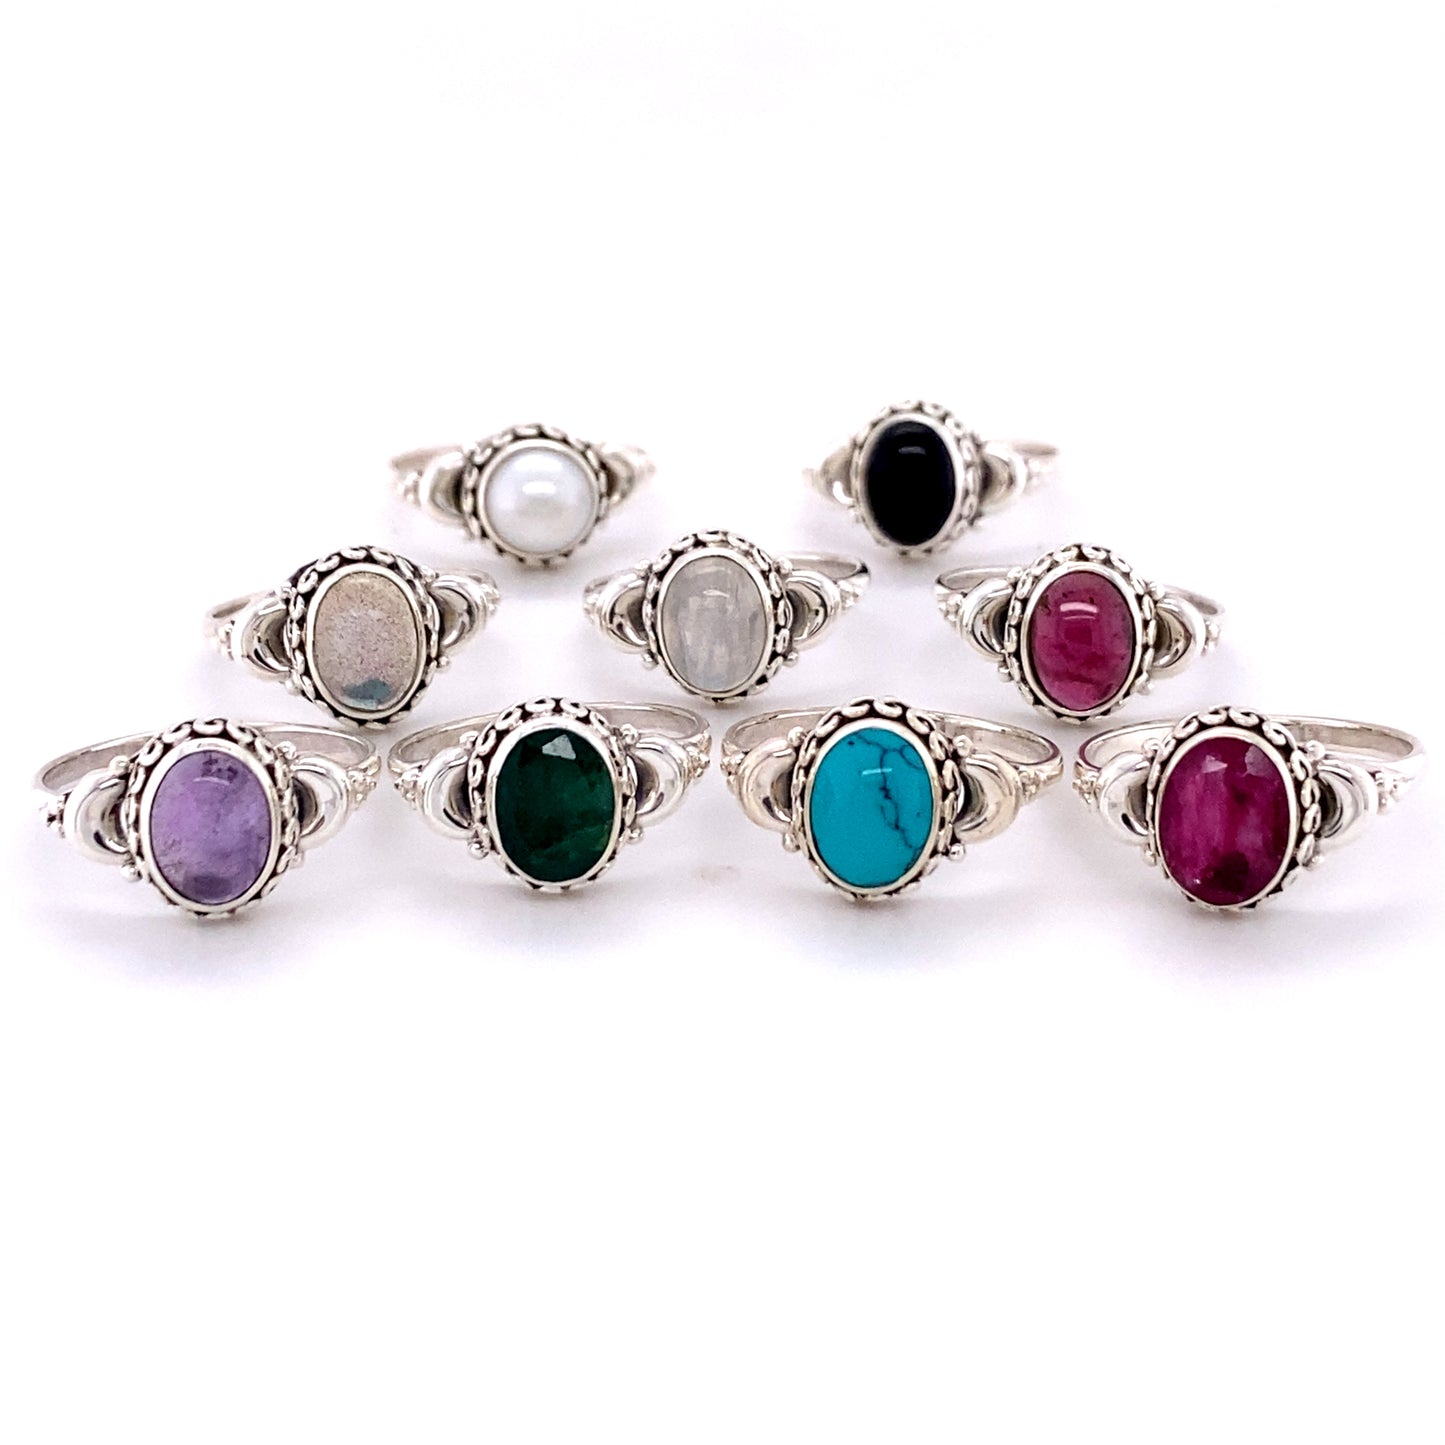 A set of Beautiful Oval Gemstone Rings with Small Moons, perfect for the free-spirited hippie.